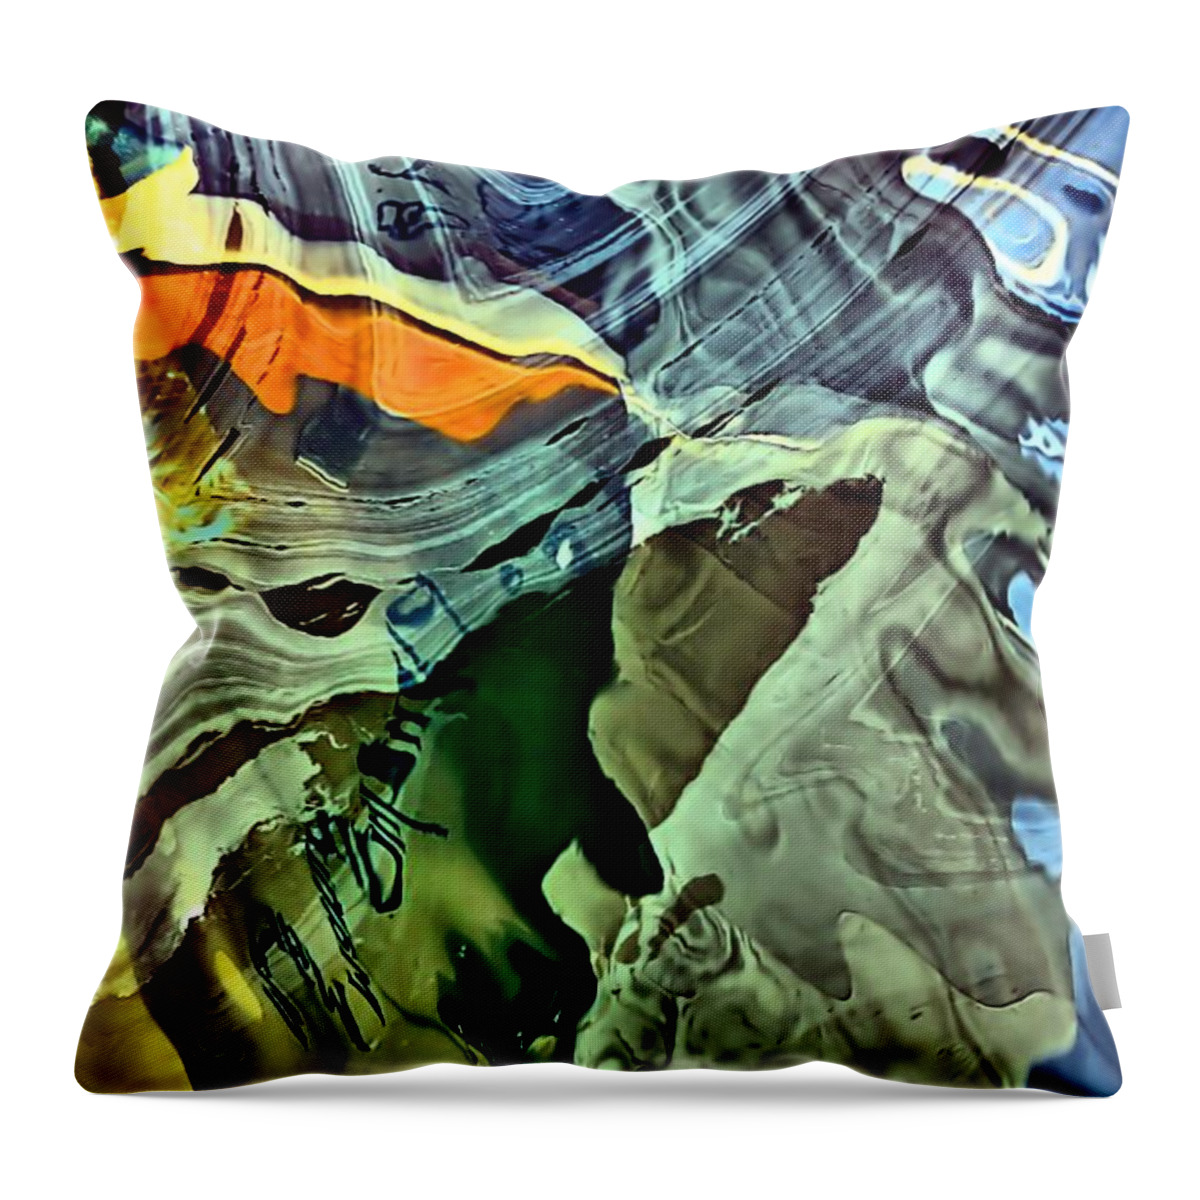 Abstract Throw Pillow featuring the photograph Wave Writer - Limited Edition by Lauren Leigh Hunter Fine Art Photography